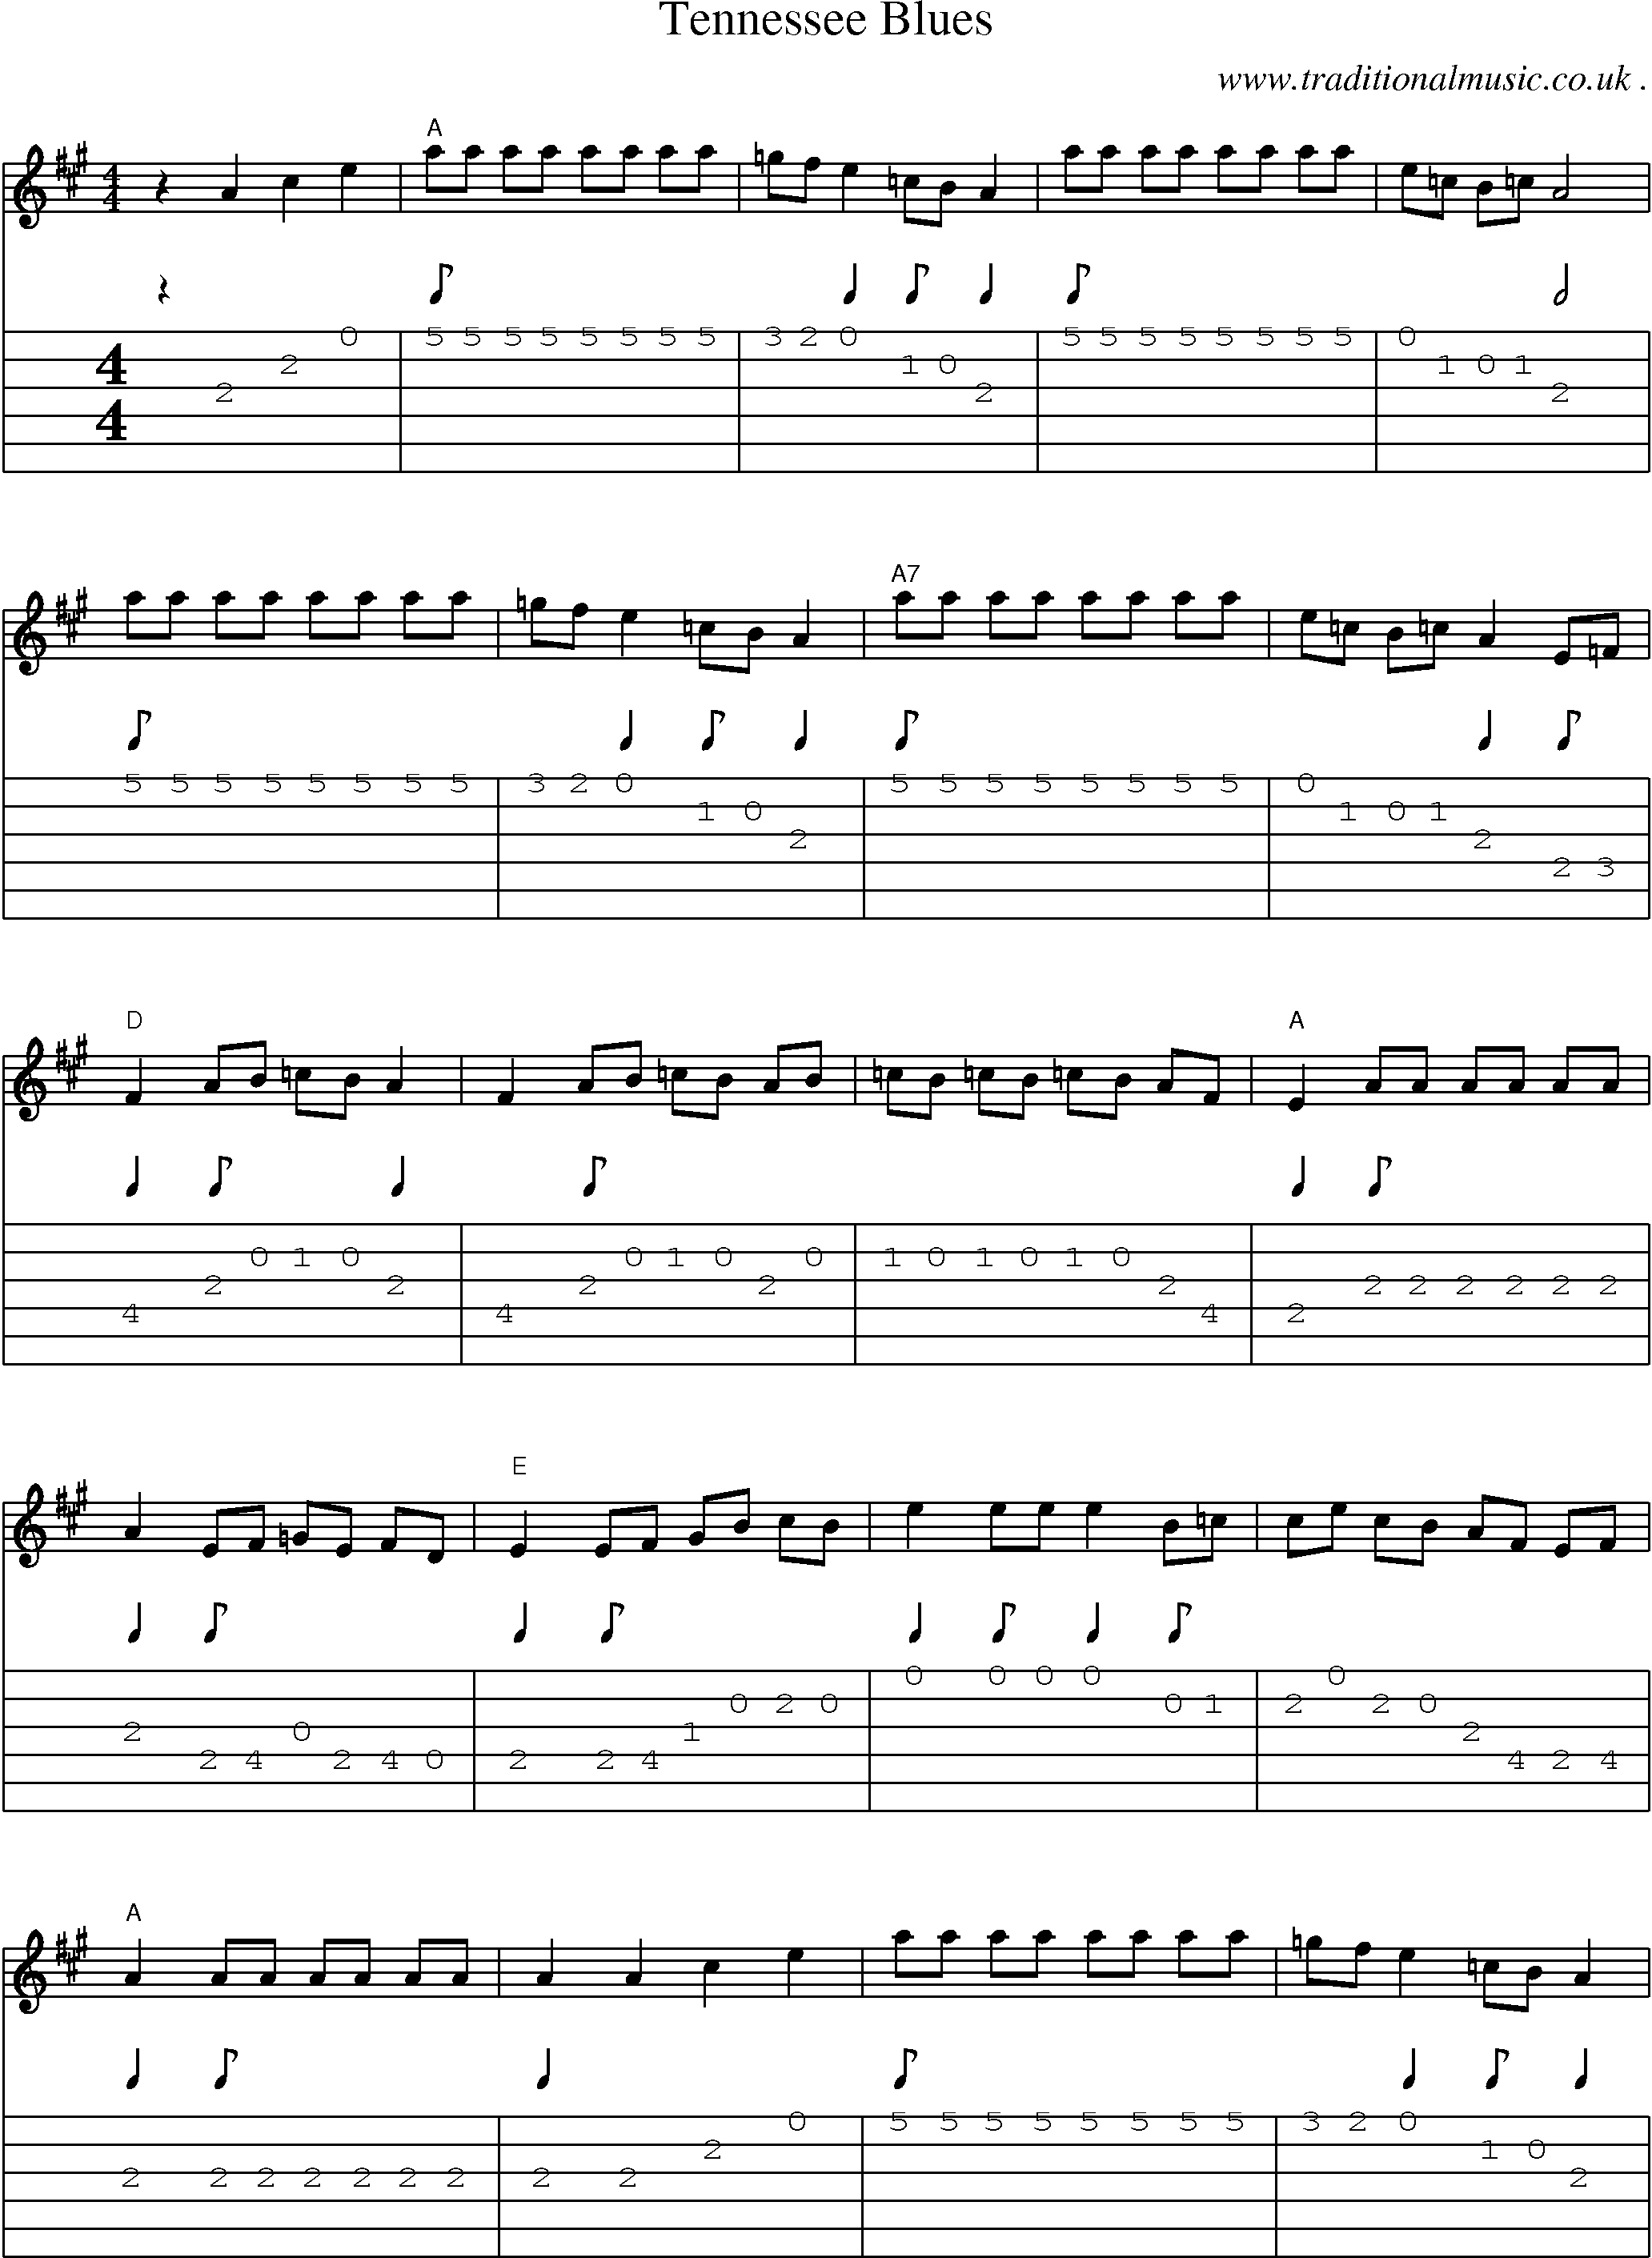 Music Score and Guitar Tabs for Tennessee Blues